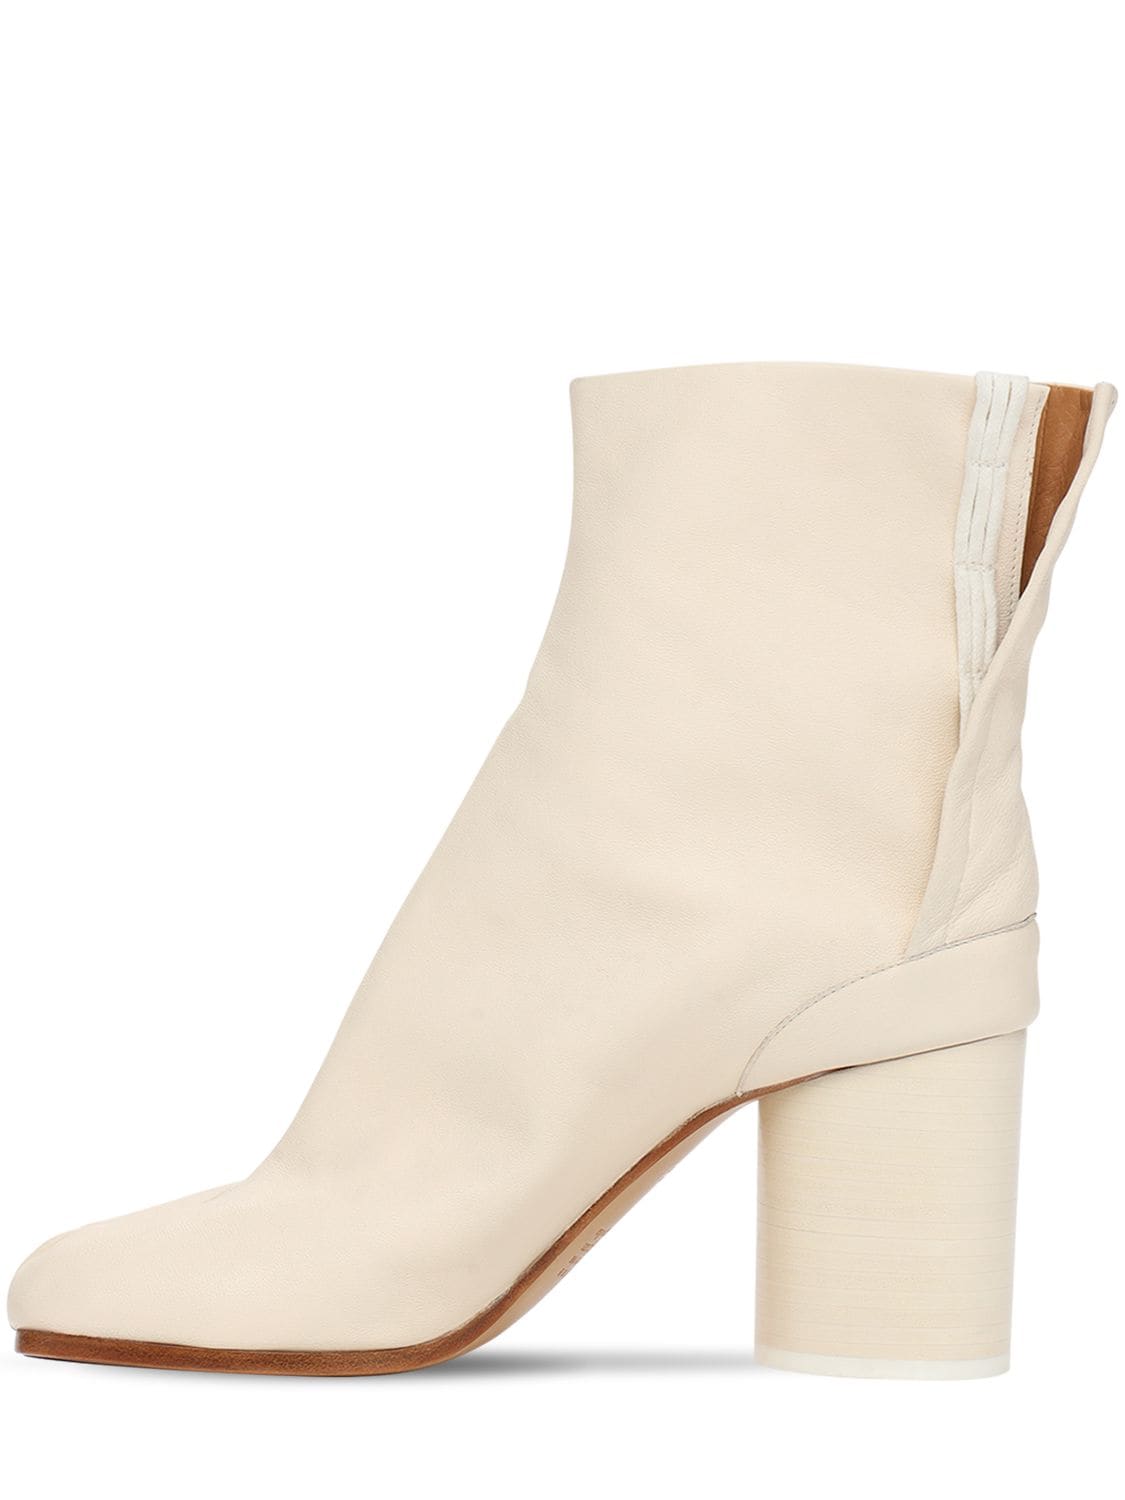 Shop Maison Margiela 80mm Tabi Vintage Leather Ankle Boots In Cream